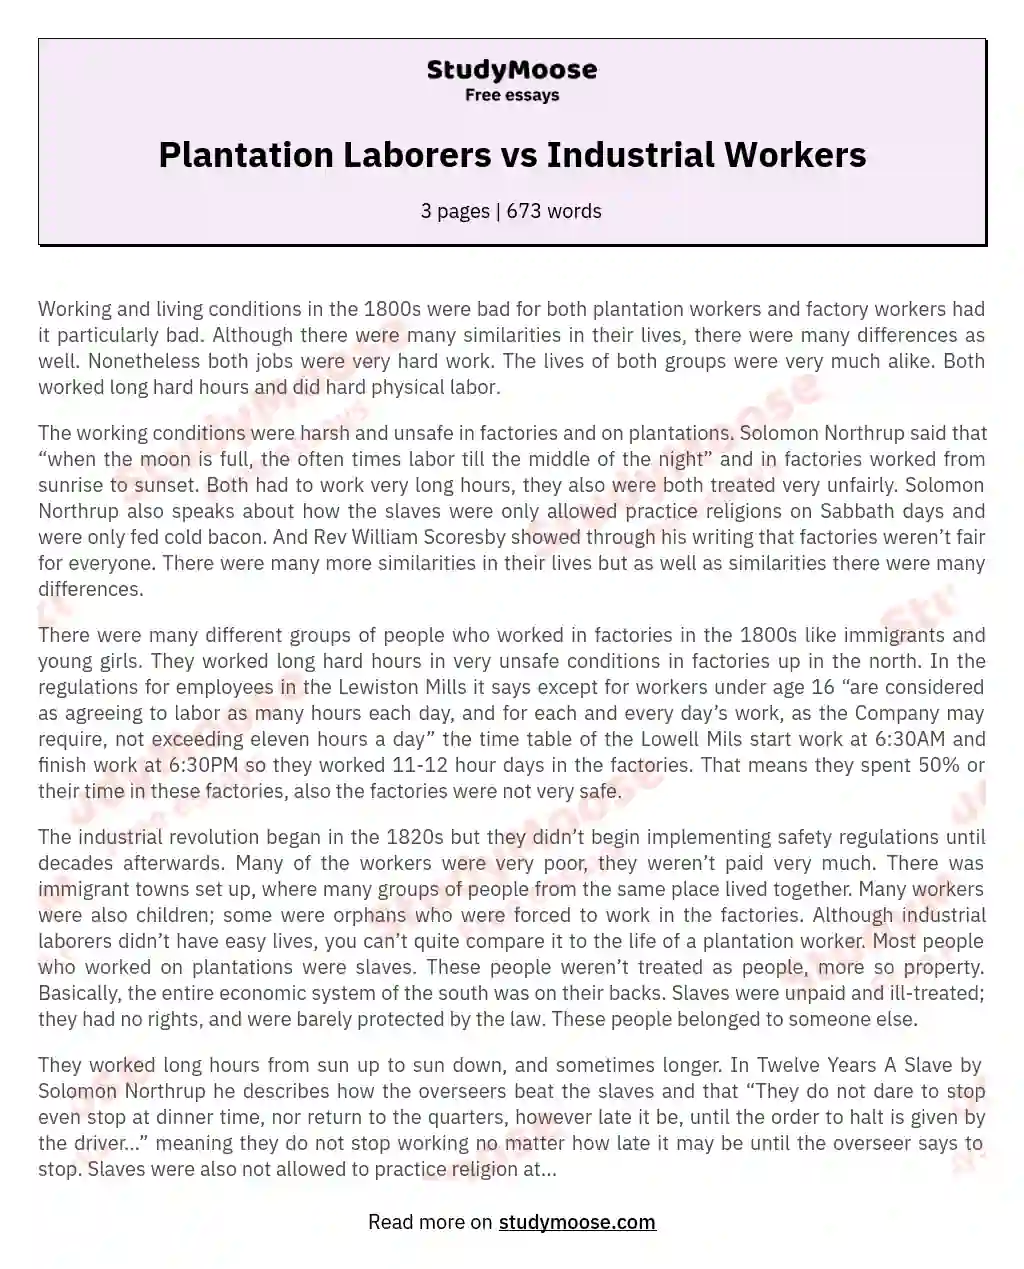 Plantation Laborers vs Industrial Workers